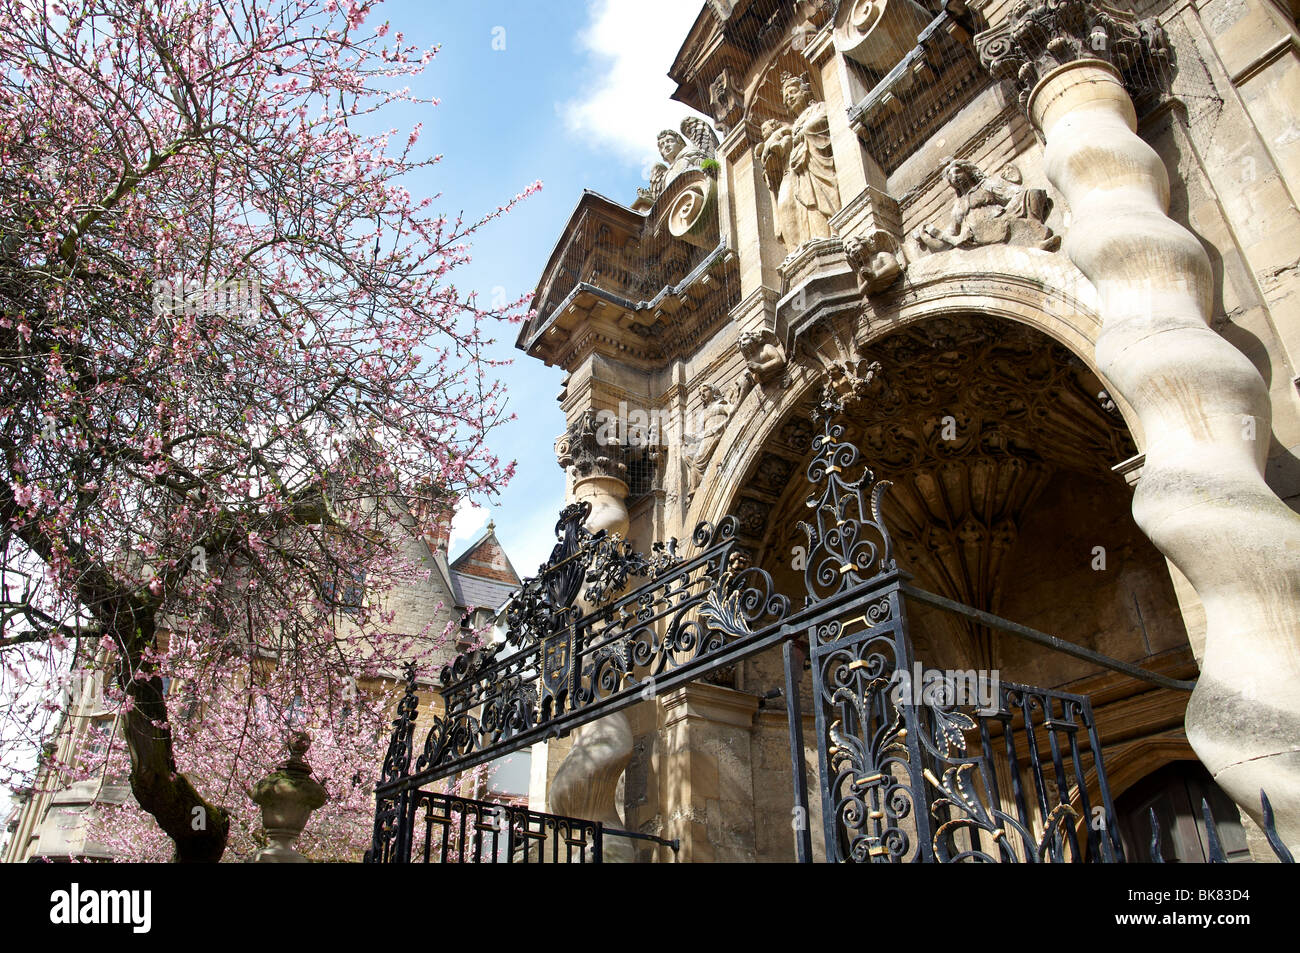 Entrance porch and gate to the University Church of St Mary the Virgin in Oxford, England with flowering cherry tree outside. Stock Photo